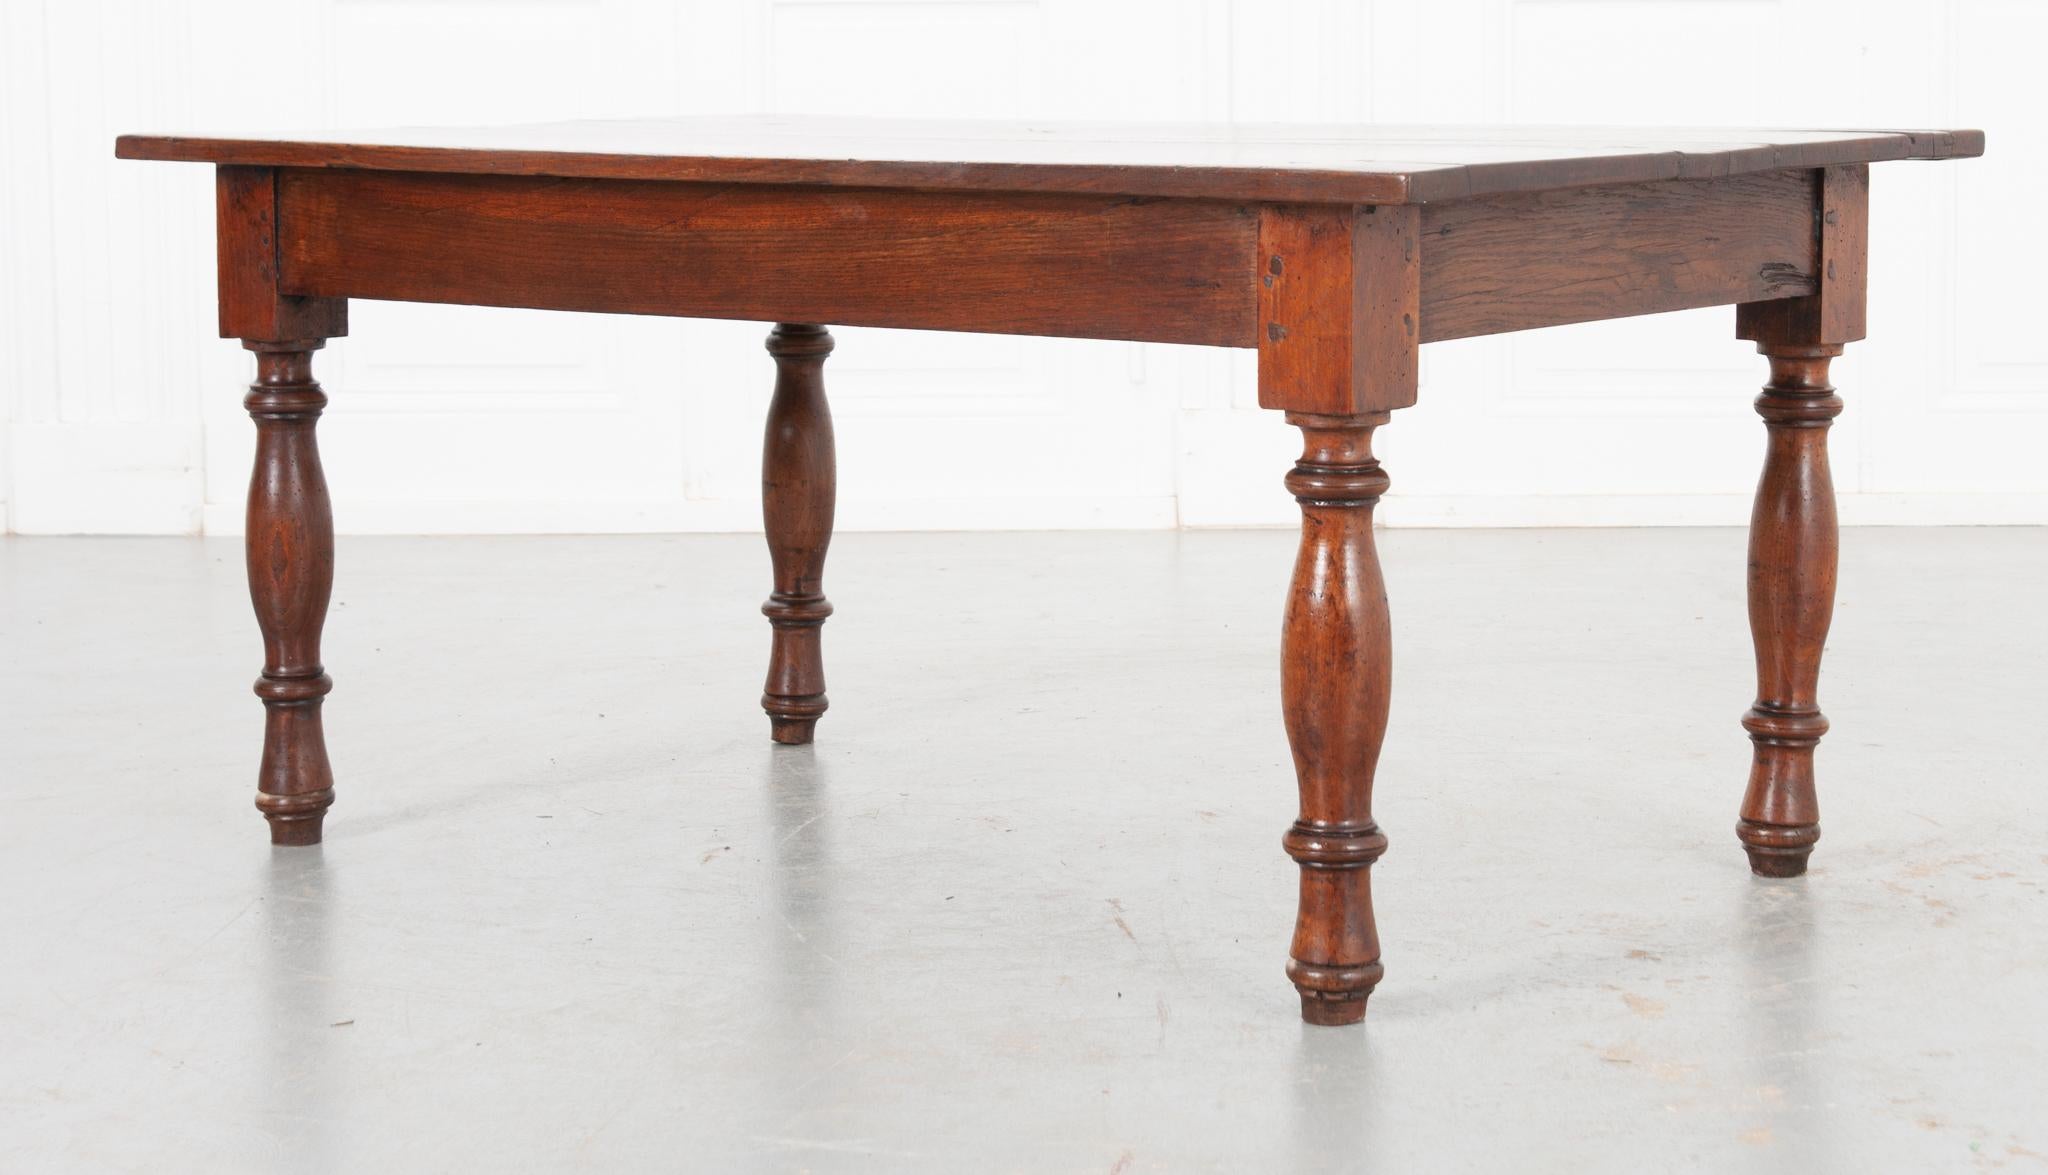 A handmade oak coffee table that is simple yet graceful. Made in the 1800’s, it’s been recently polished with a French paste wax to show off the unique grain of the wood. The modest apron is attached to beautifully turned wooden legs using treenail